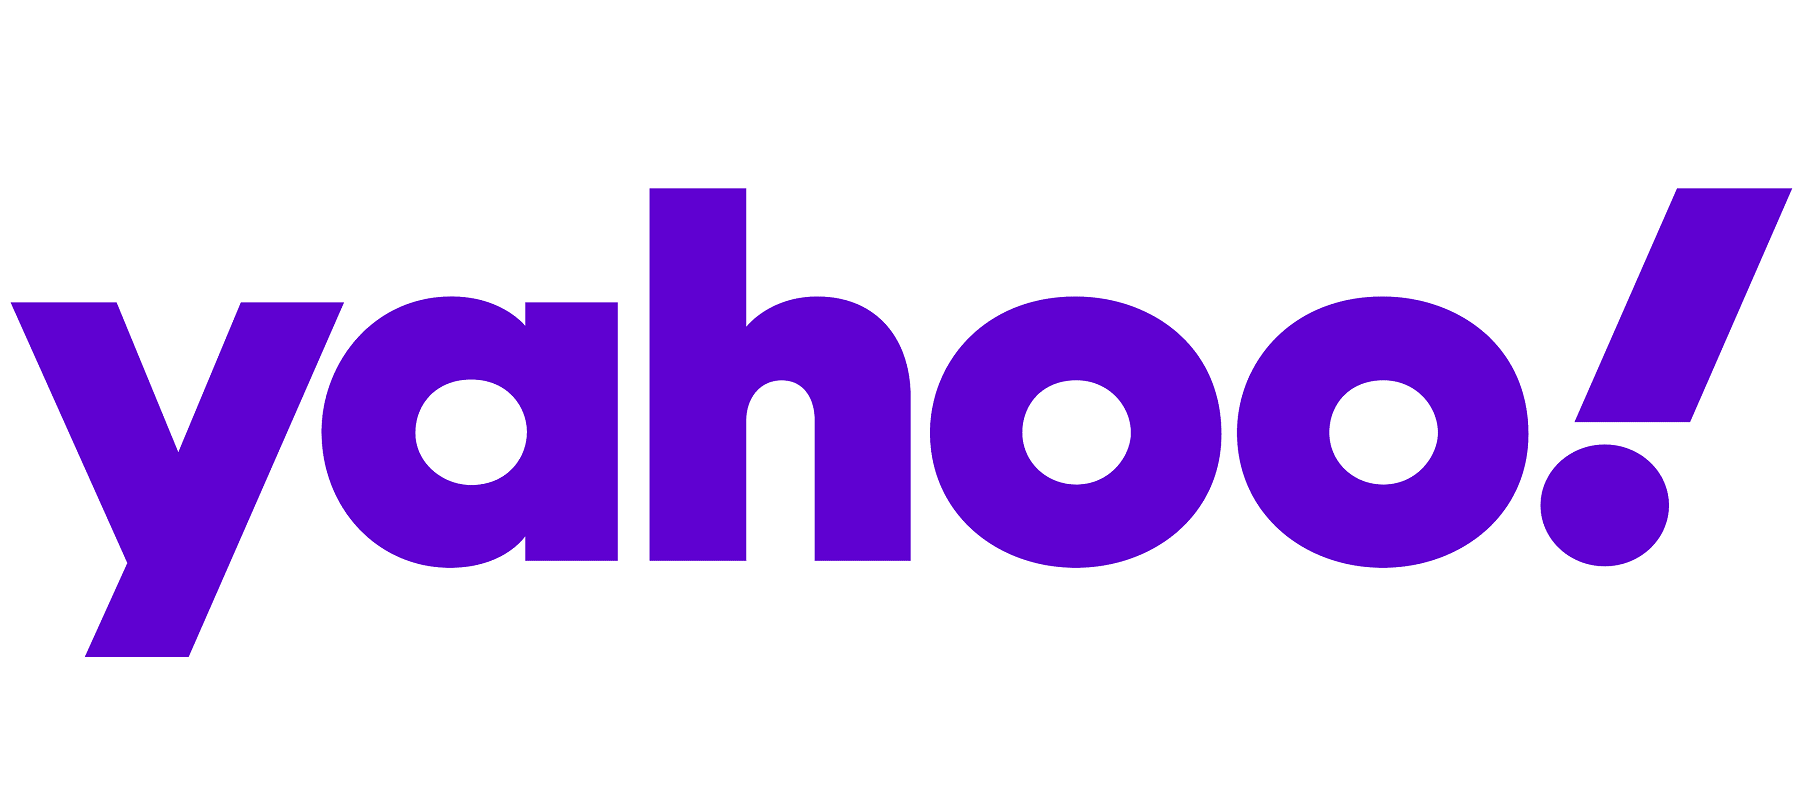 Yahoo to integrate identity solution with Twilio platform to drive advertising reach